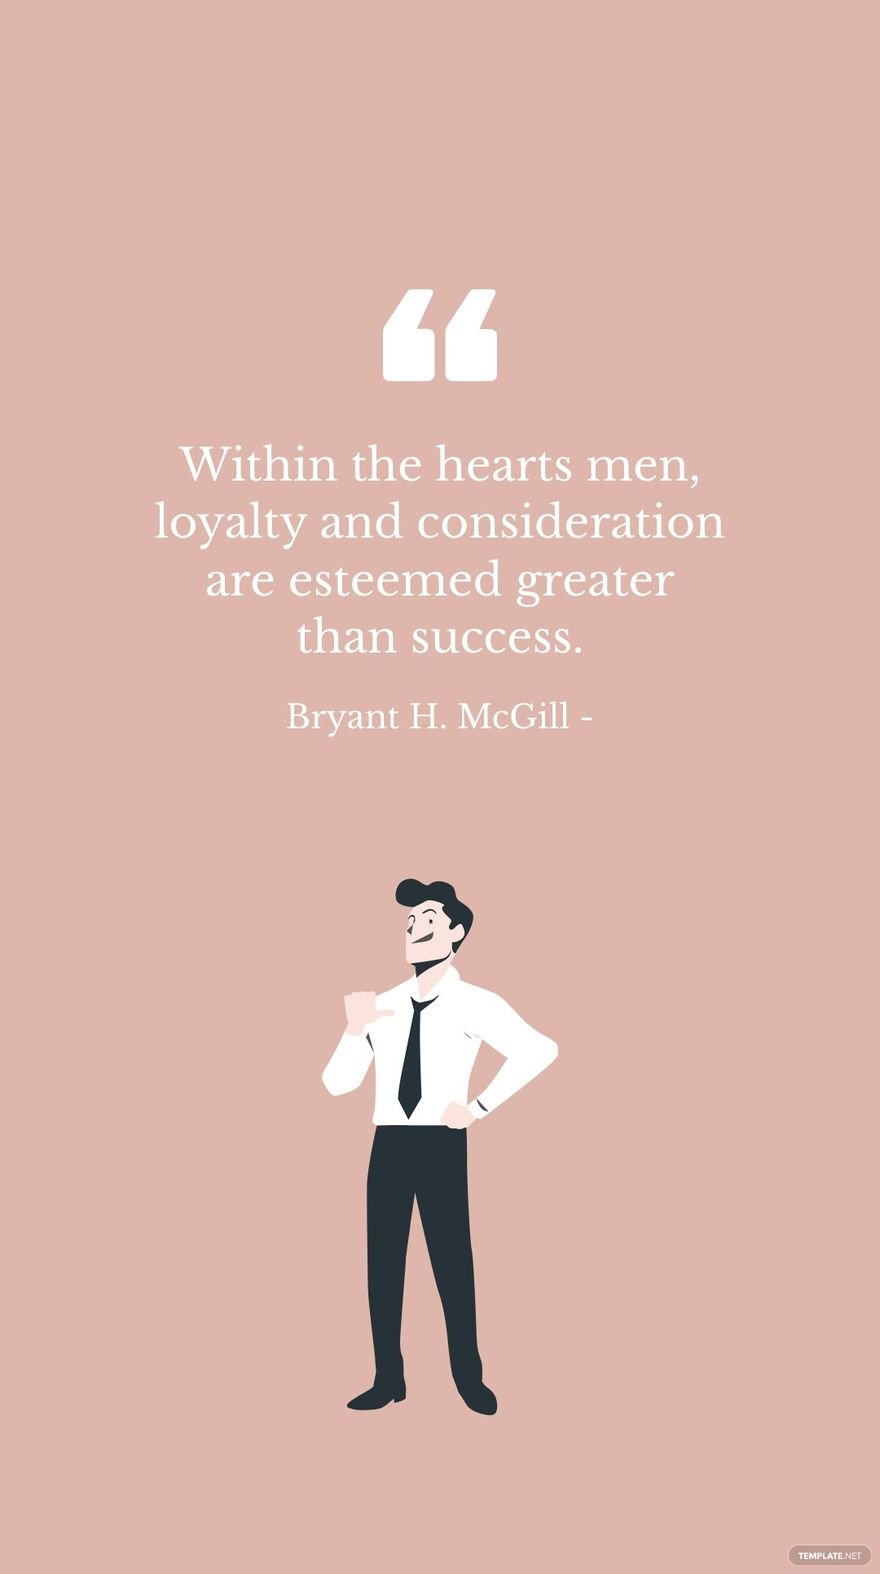 Bryant H. McGill - Within the hearts men, loyalty and consideration are esteemed greater than success.